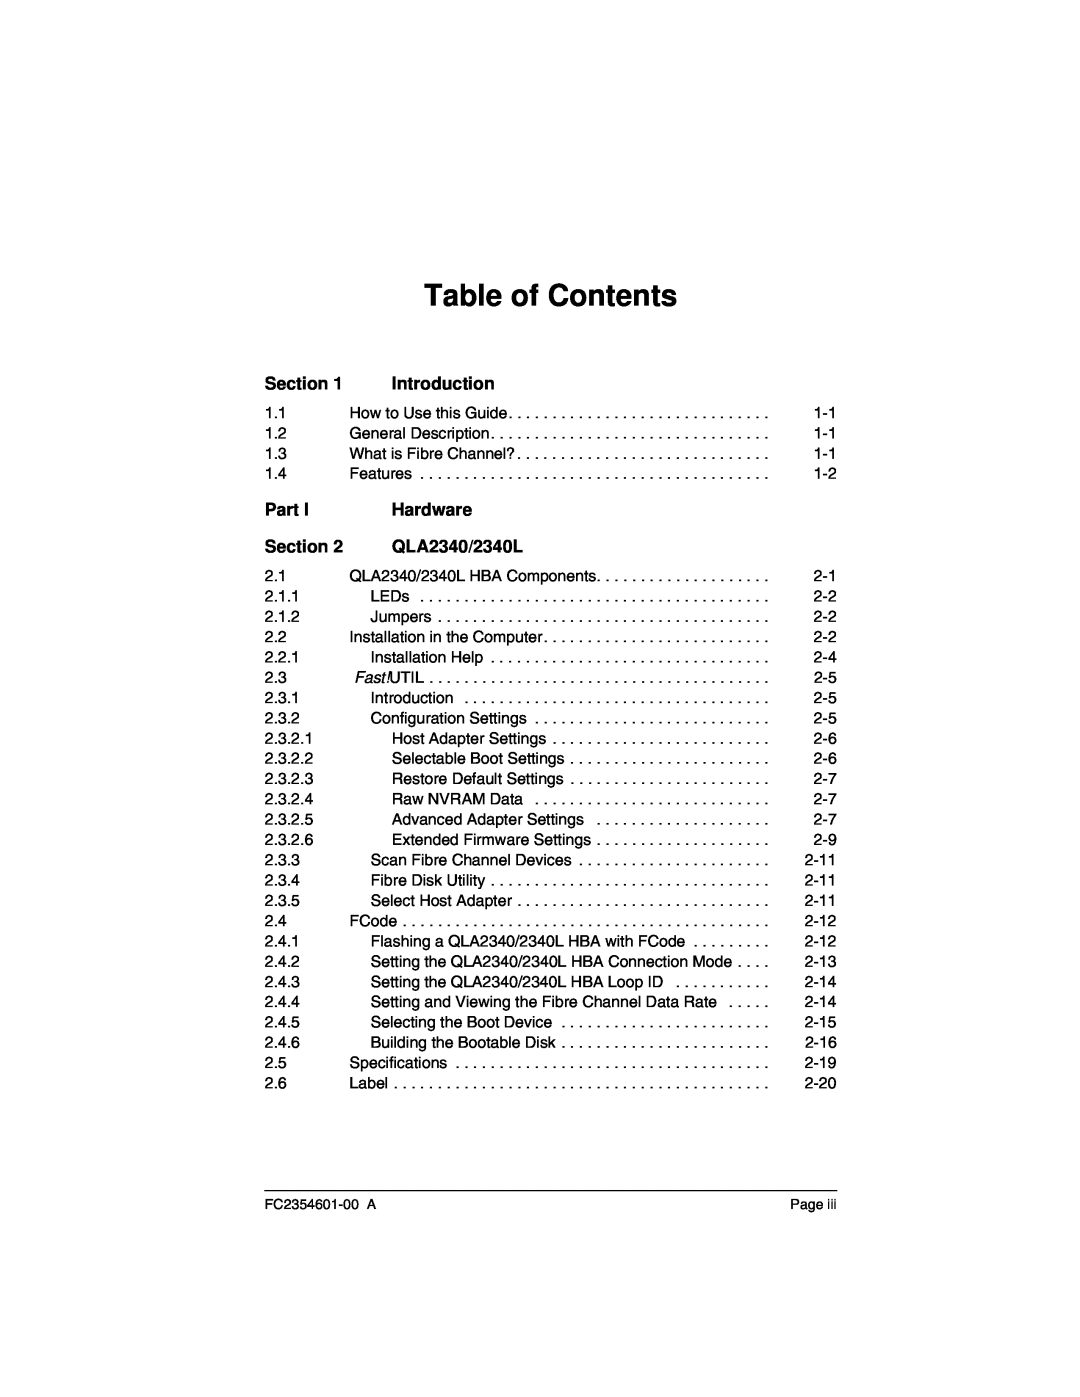 Q-Logic 2300 manual Section, Introduction, Part, Hardware, QLA2340/2340L, Table of Contents 